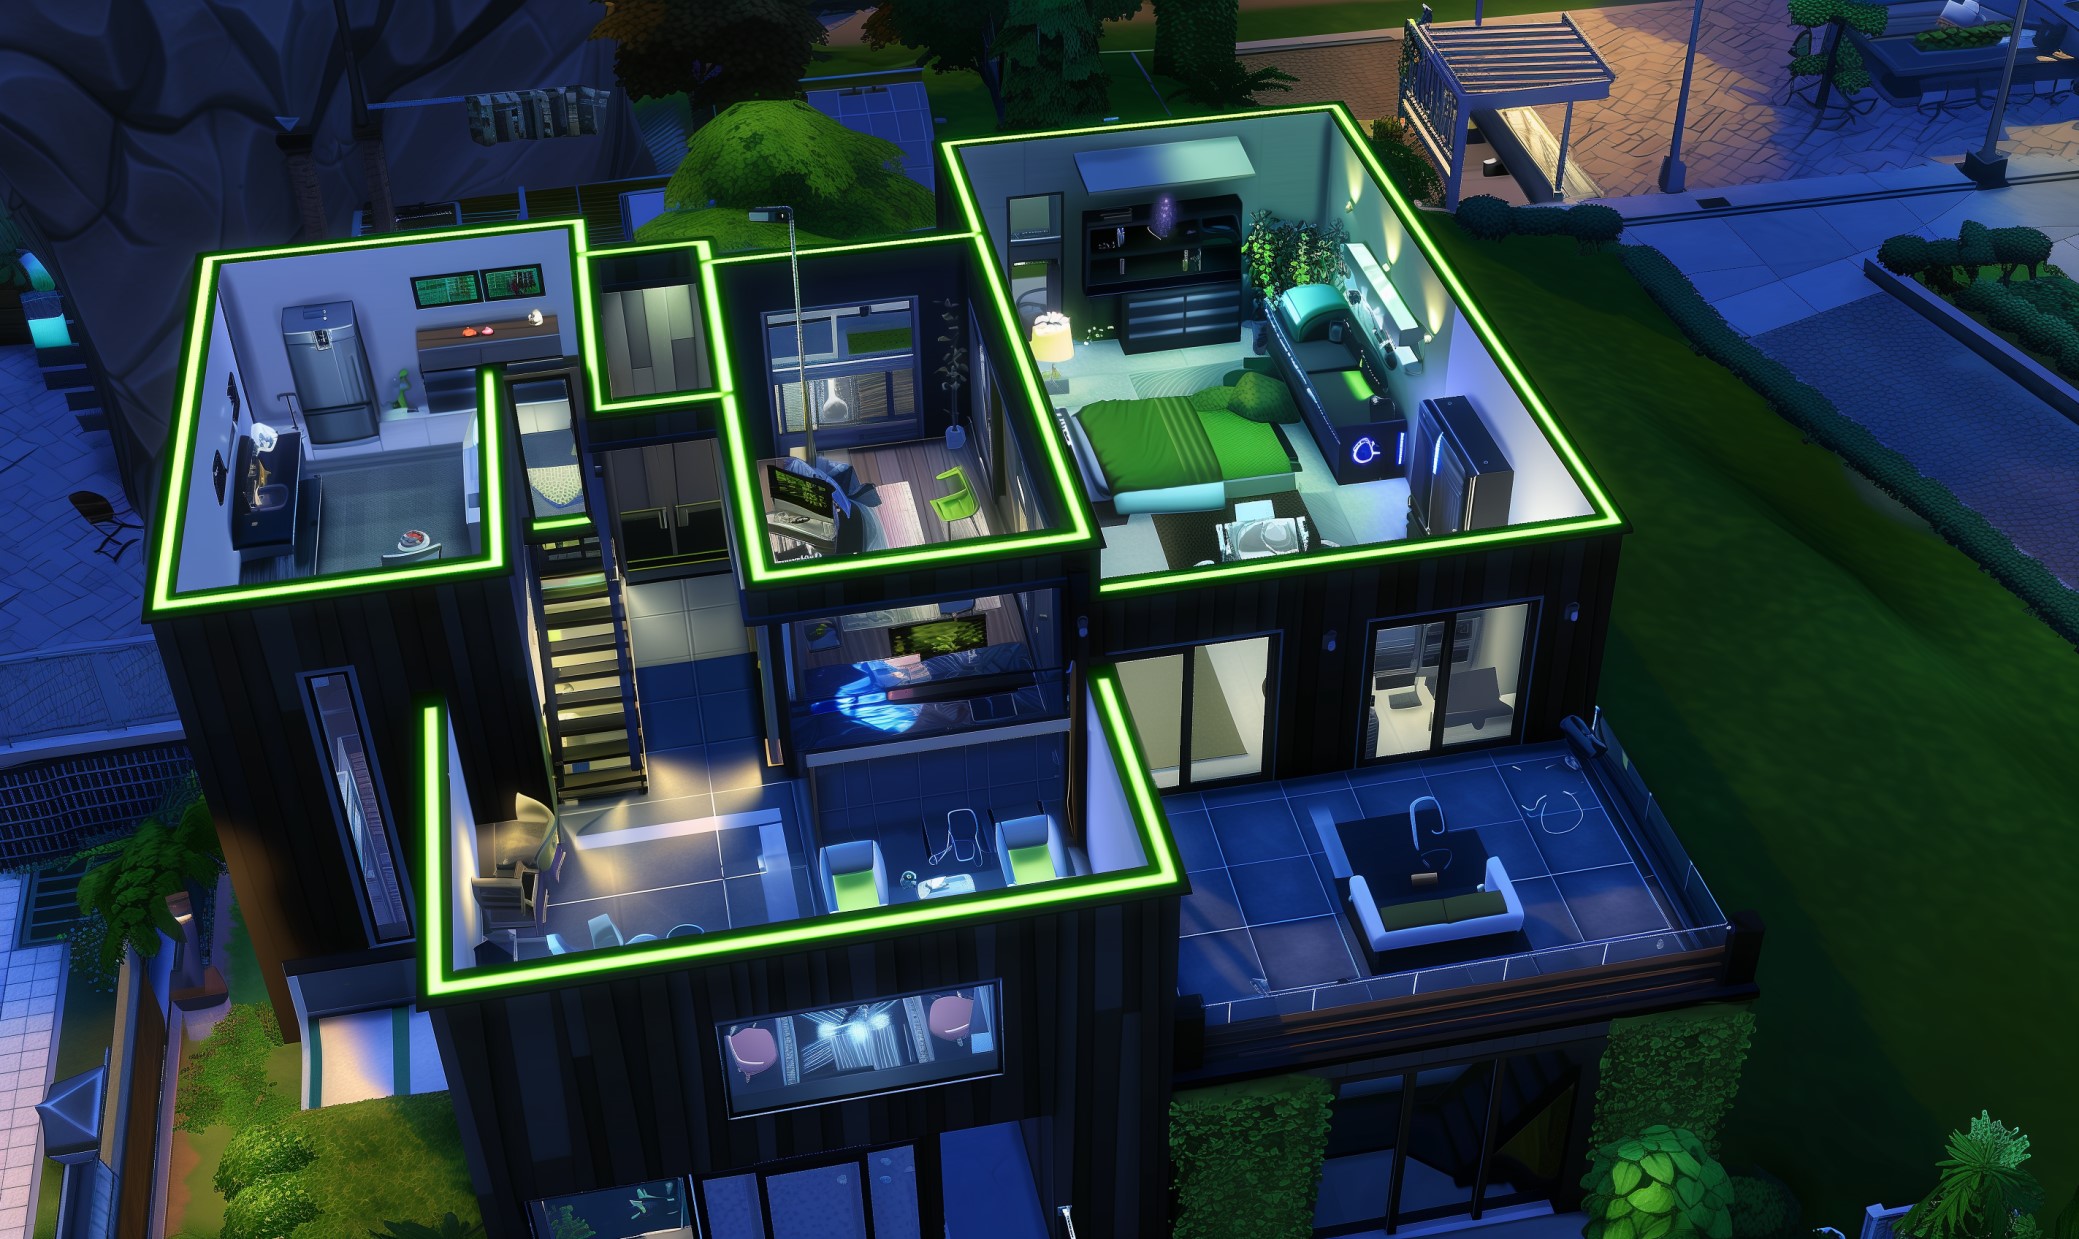 Sims 4 Cheats: All Base Game and Expansion Pack Cheat Codes